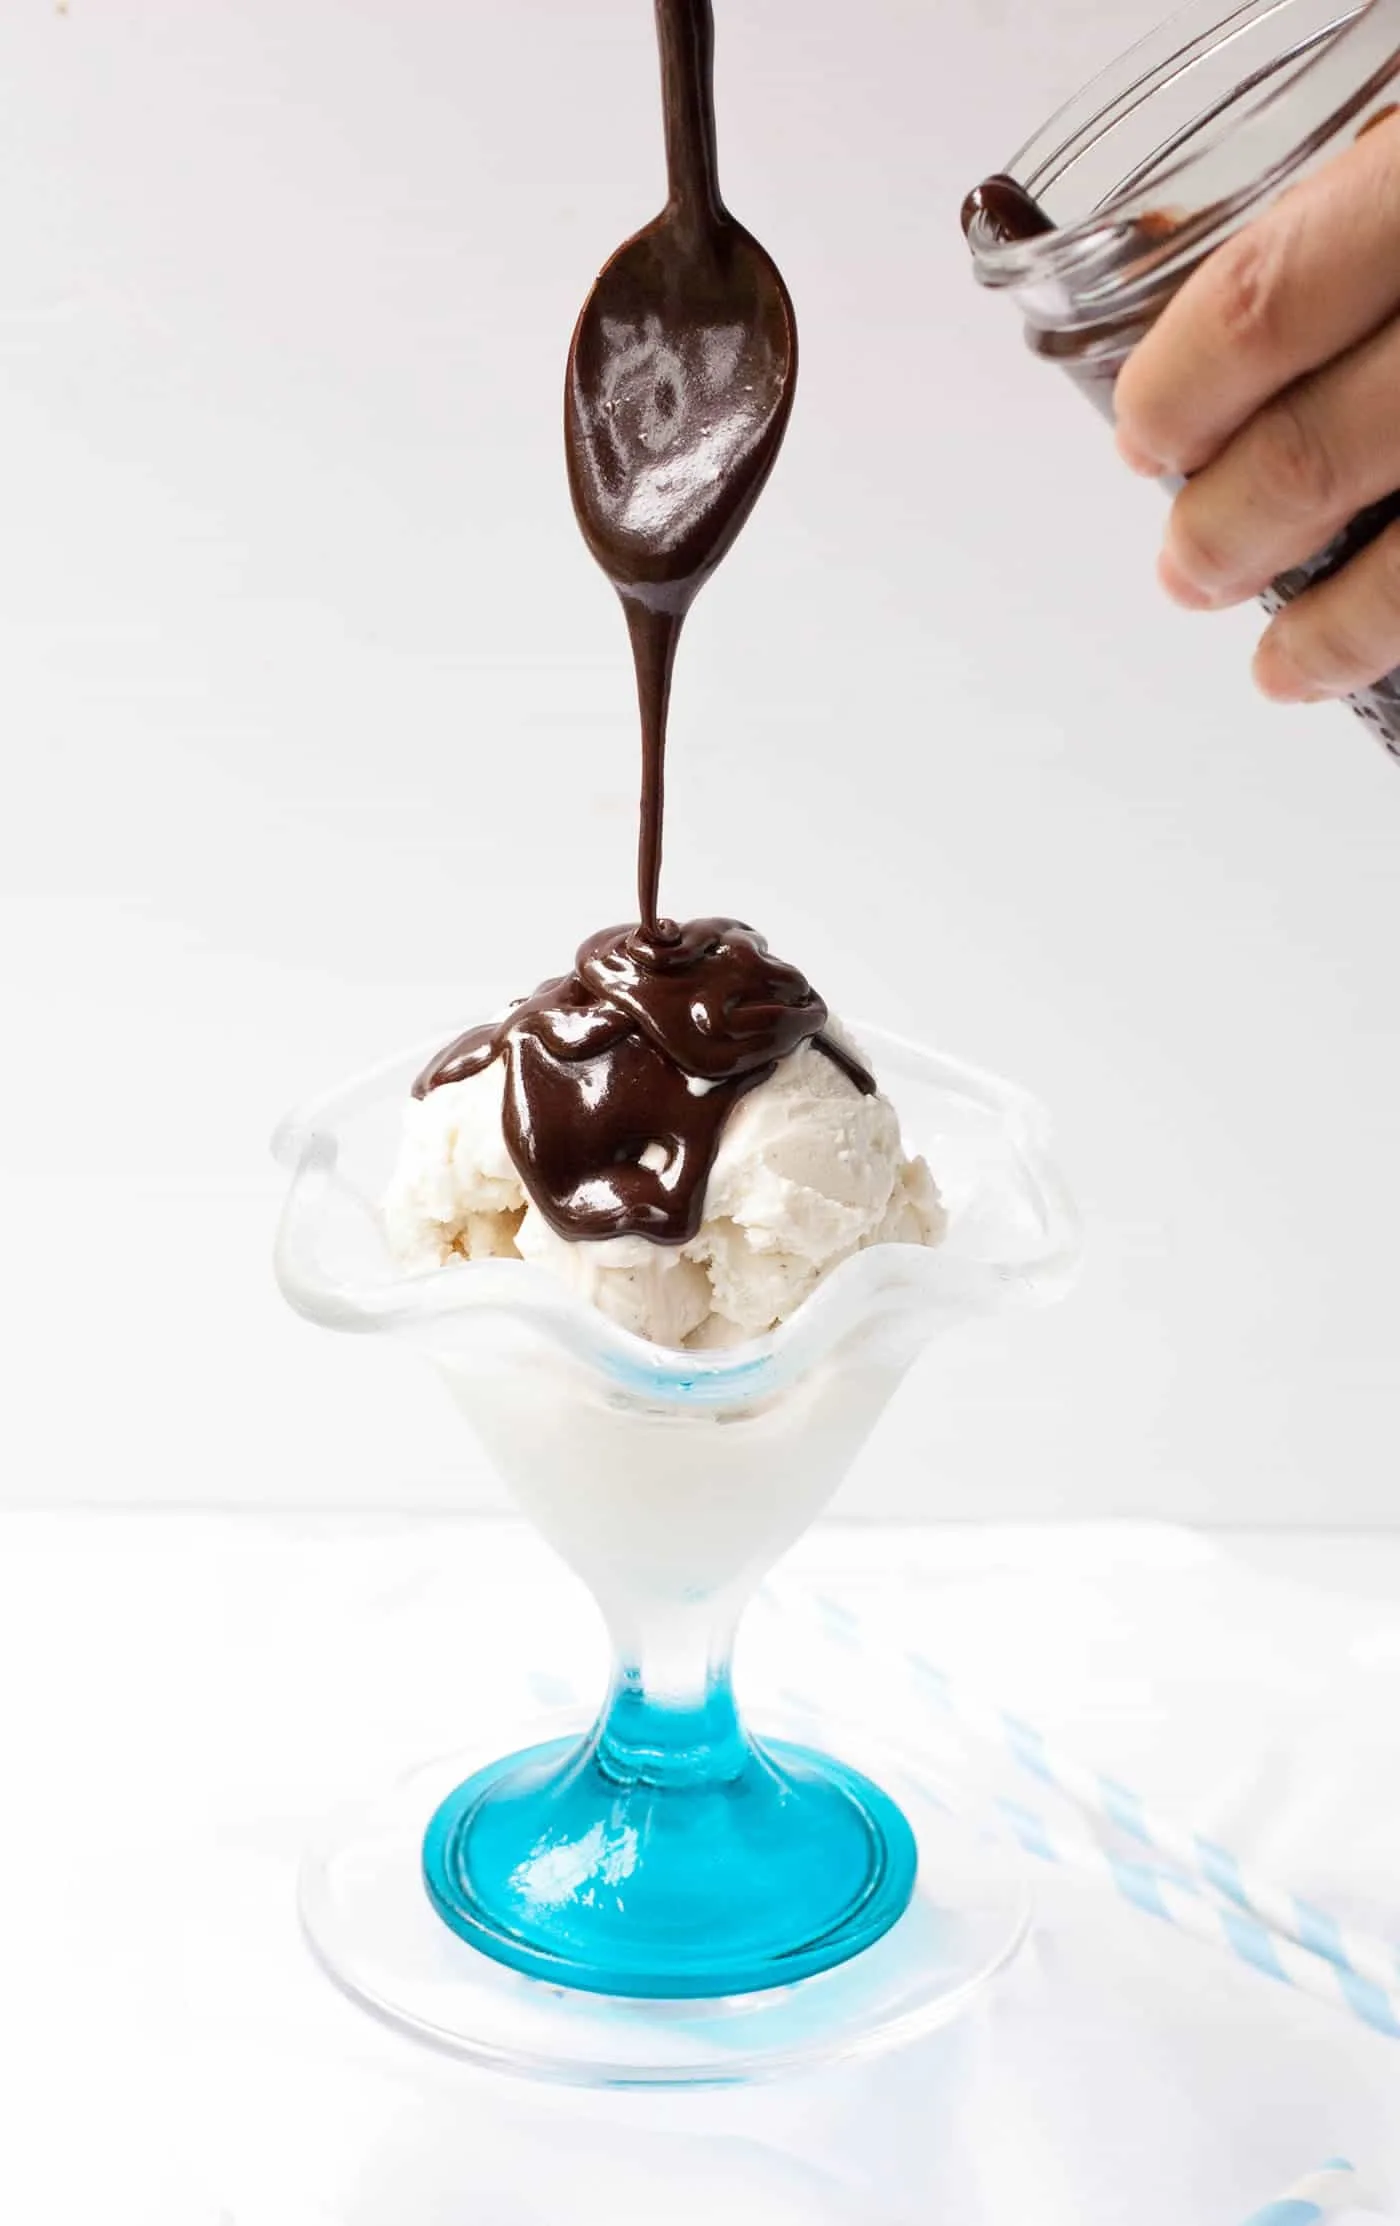 Chewy Hot Fudge Sauce. This is the hot fudge that gets gloriously soft and chewy when it hits your ice cream. Never sticky, just perfectly delicious!